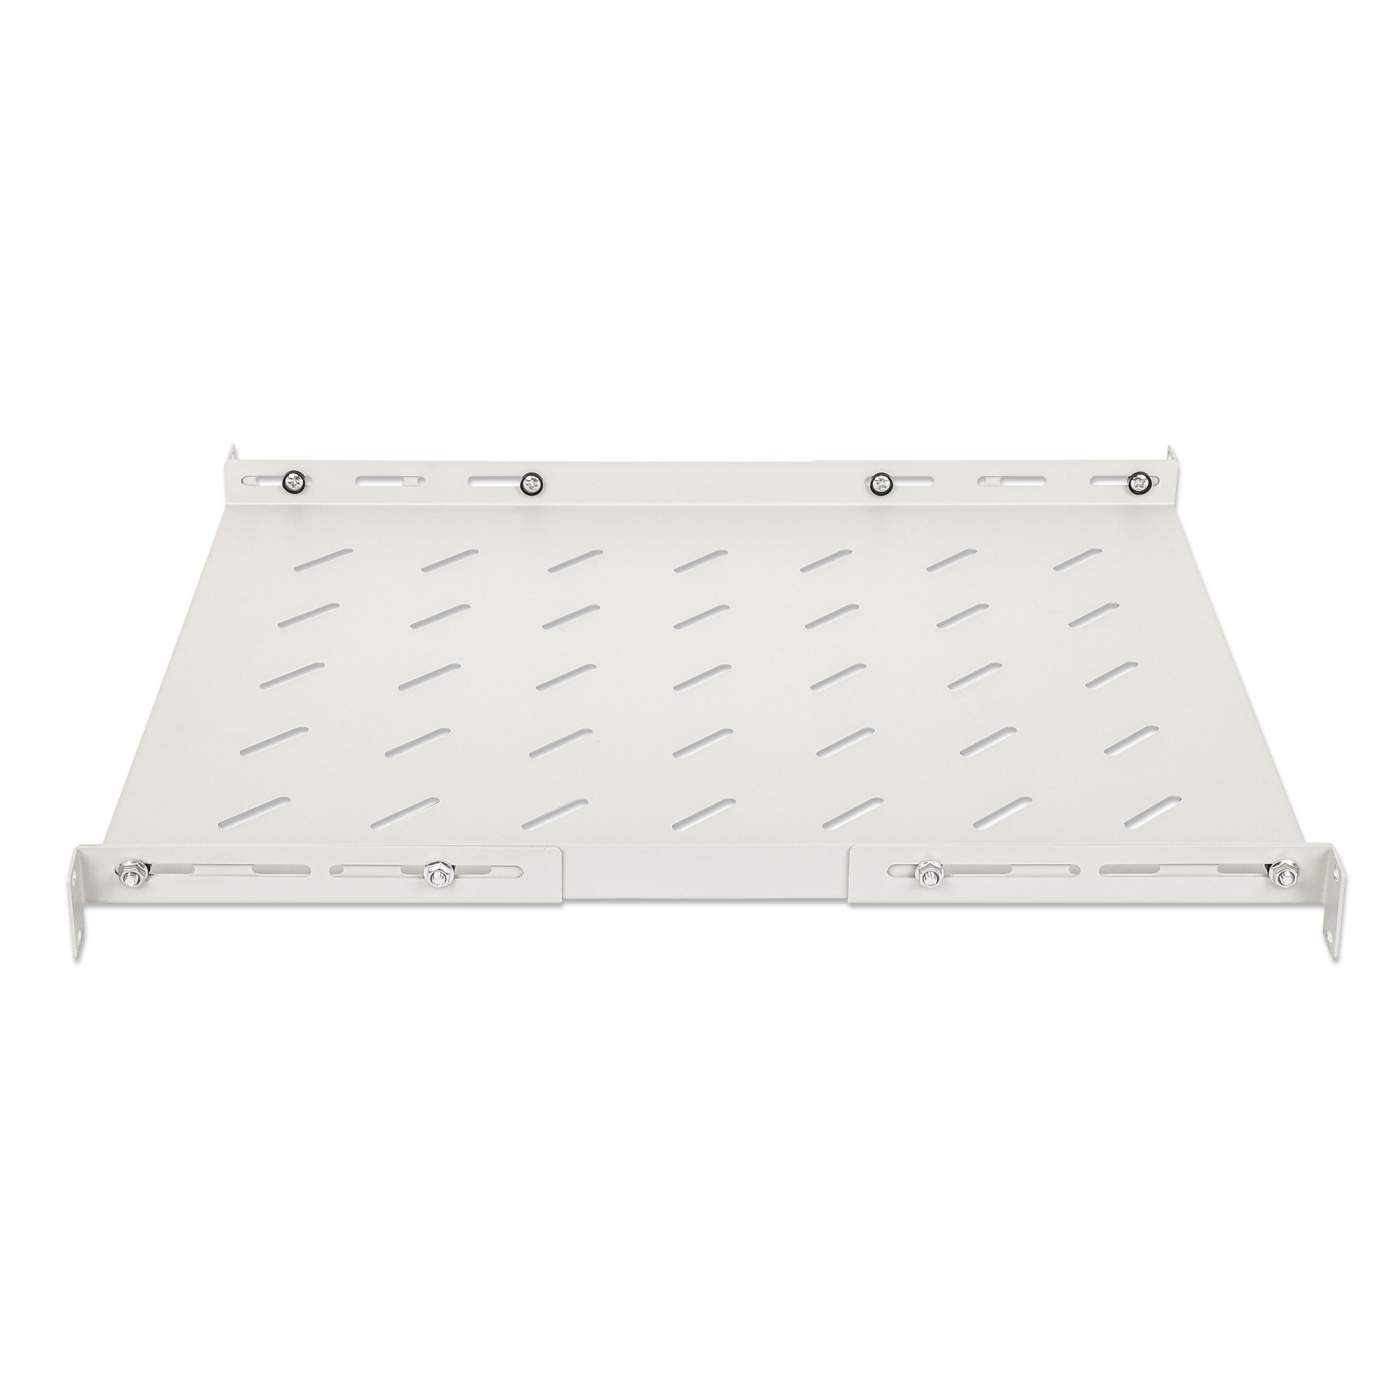 19" Shelf with Variable Rails for Fixed Mounting Image 4